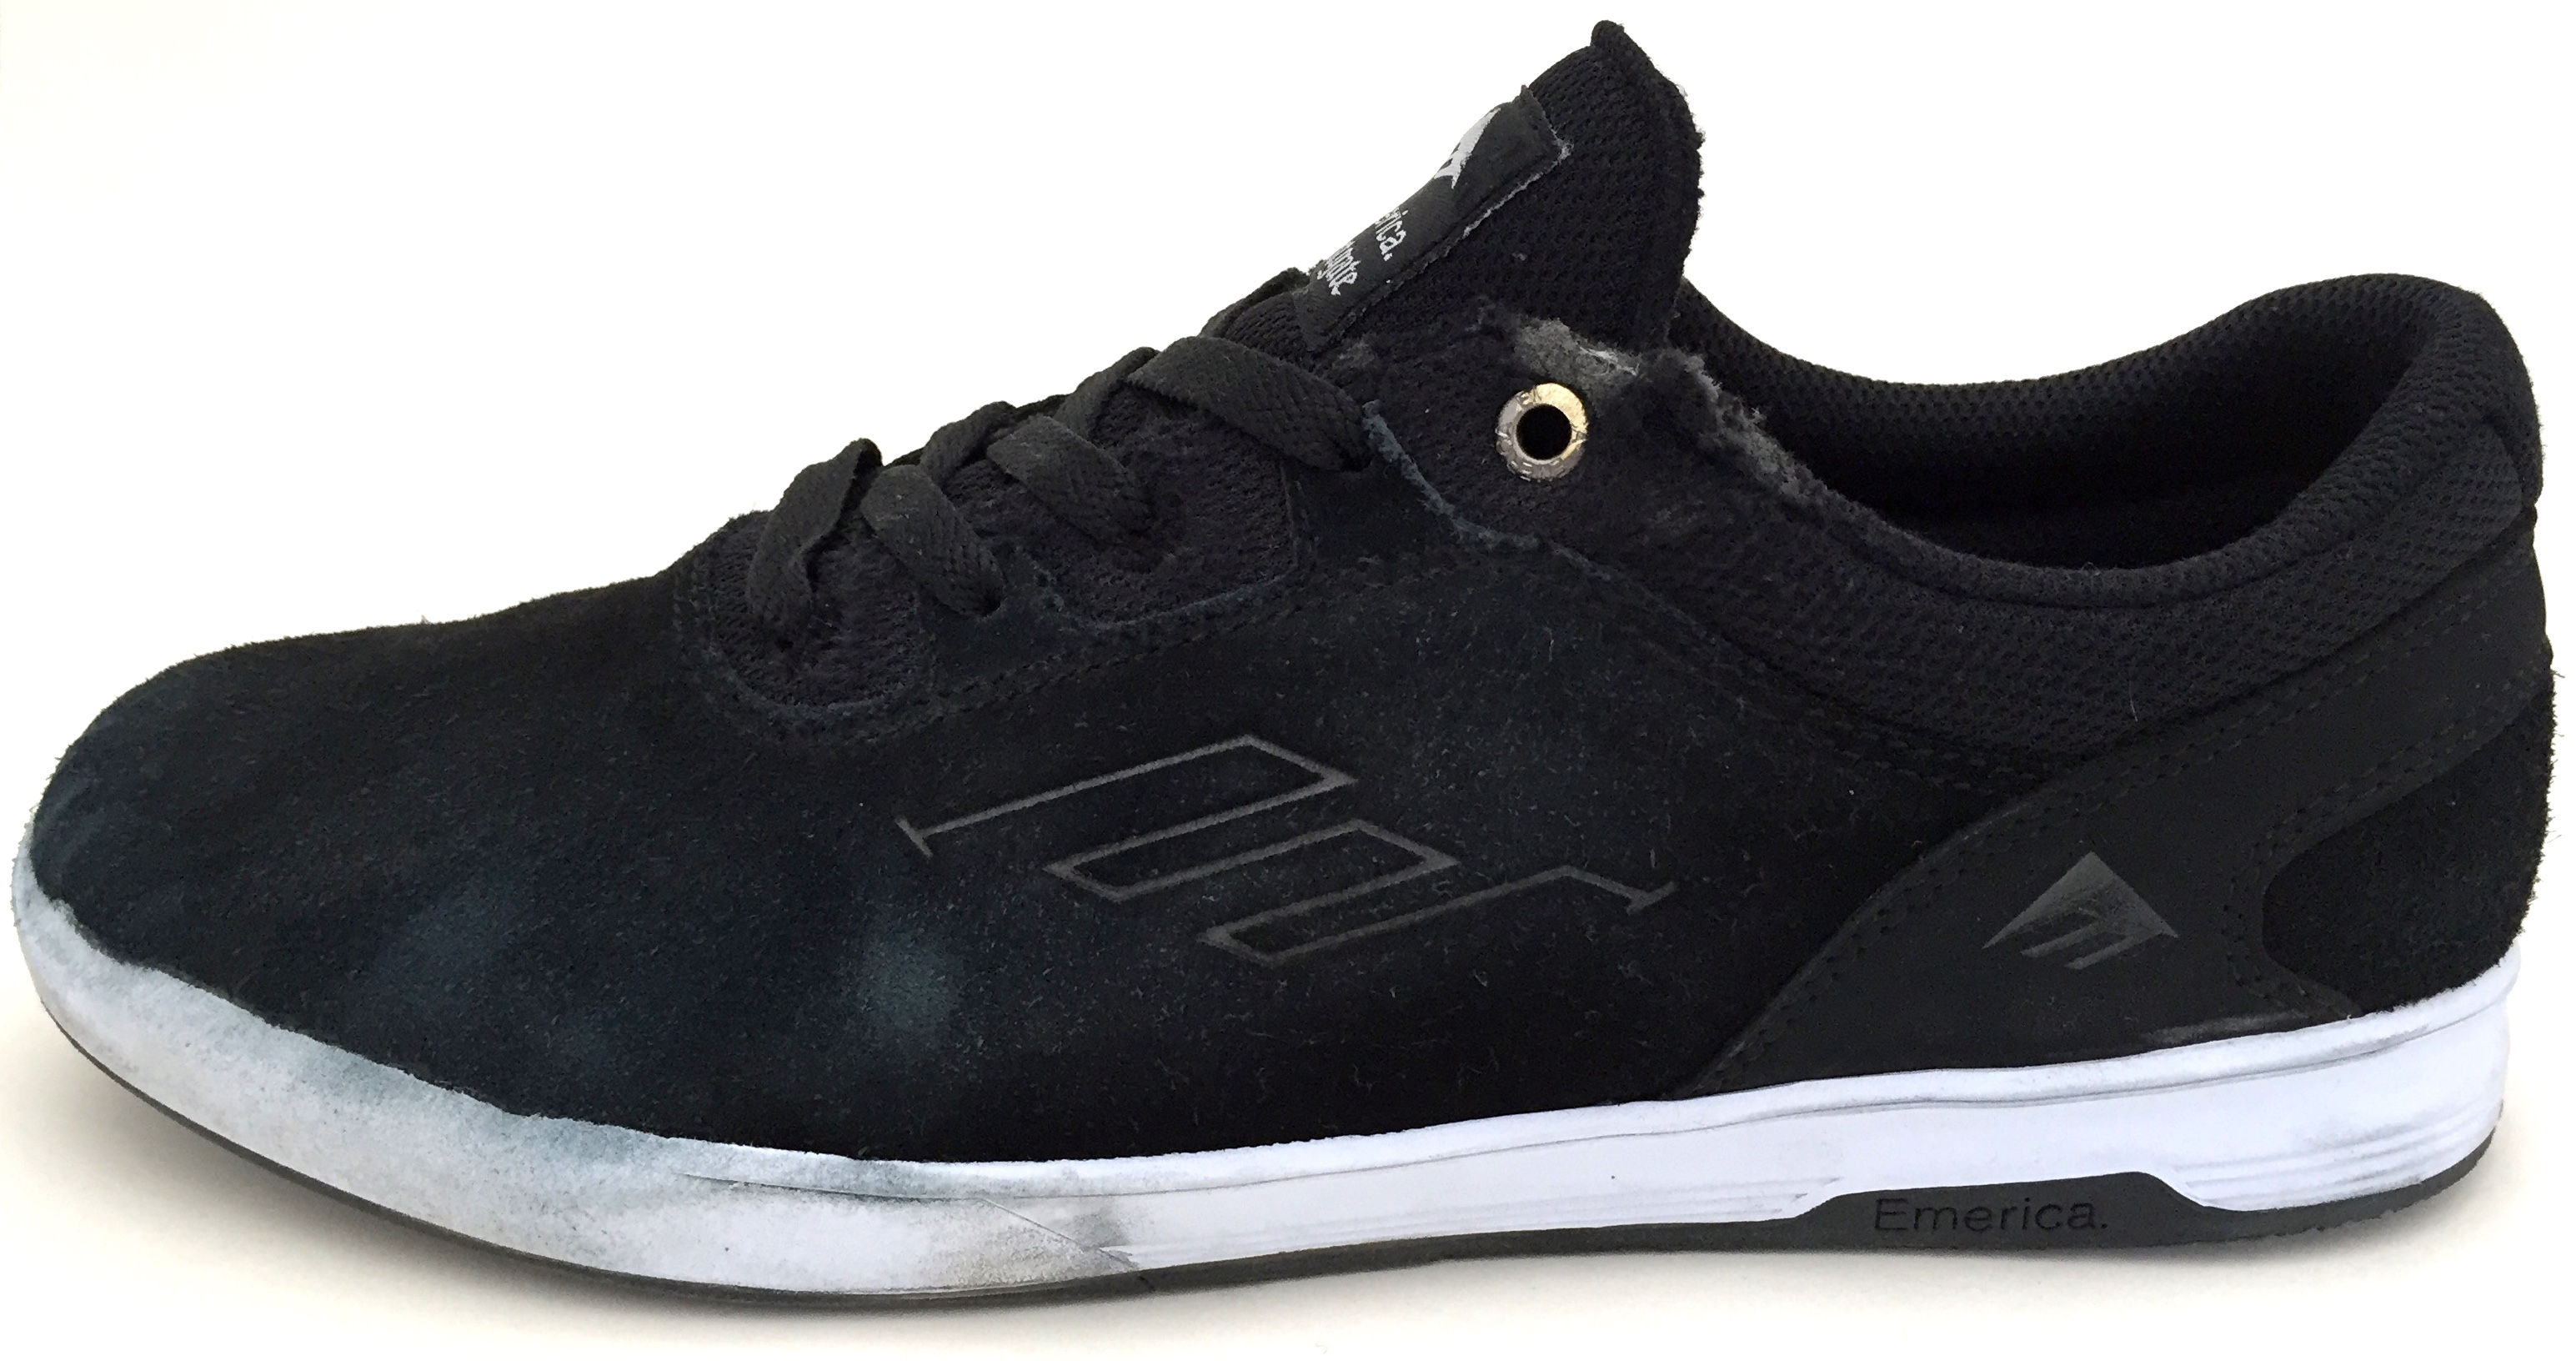 Emerica Westgate CC & Westgate Mid Vulc - Weartested - detailed ...